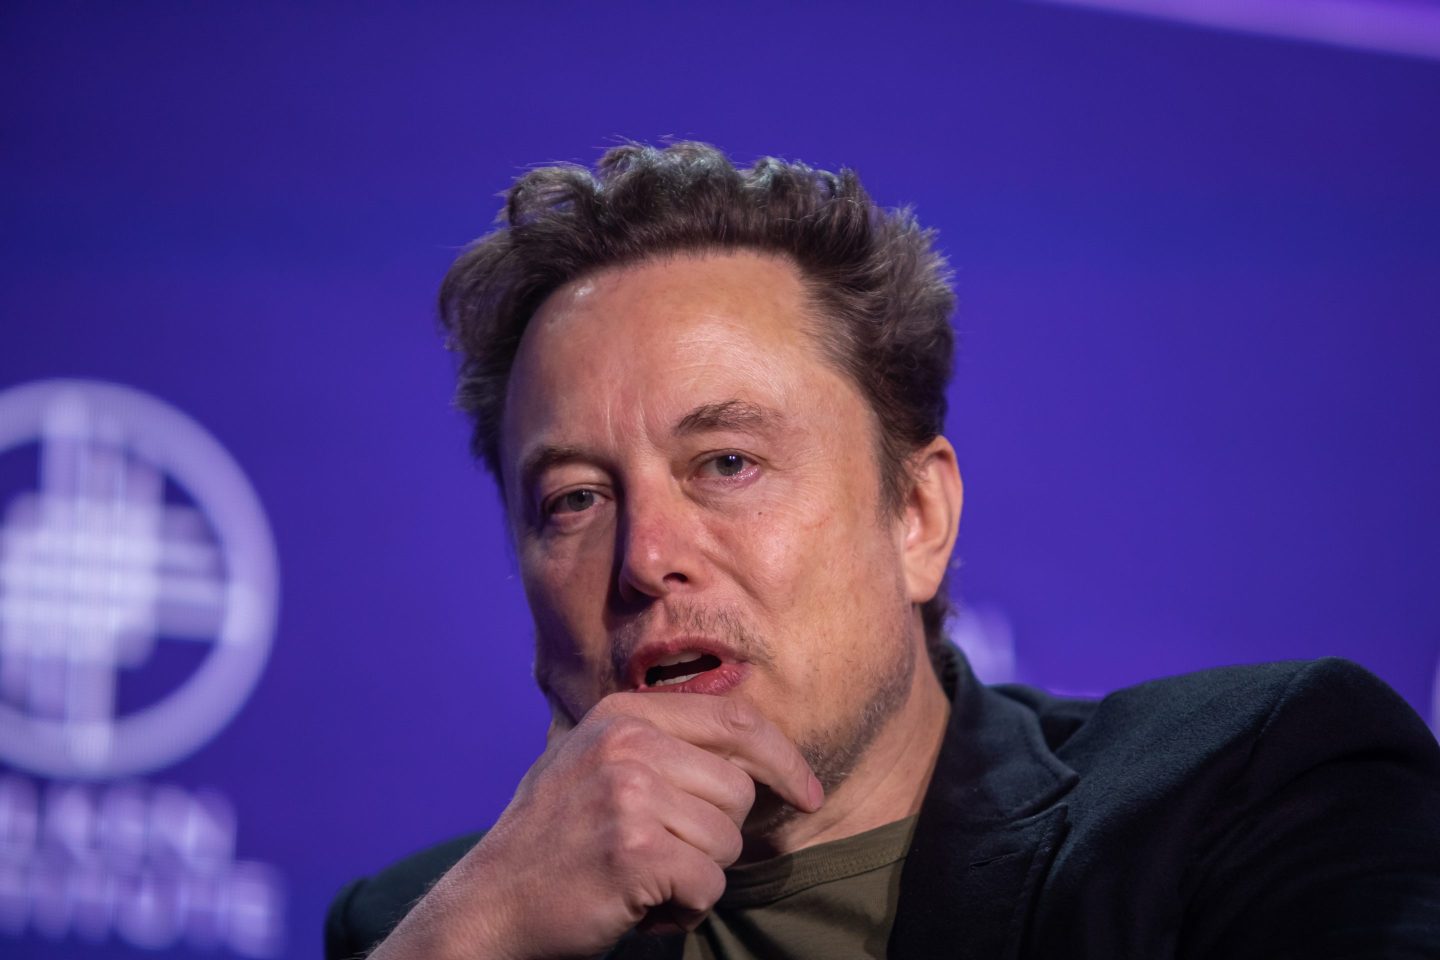 Elon Musk Voices Concern Over Anti-Chinese Tariffs, Highlights Trade Policy Issues